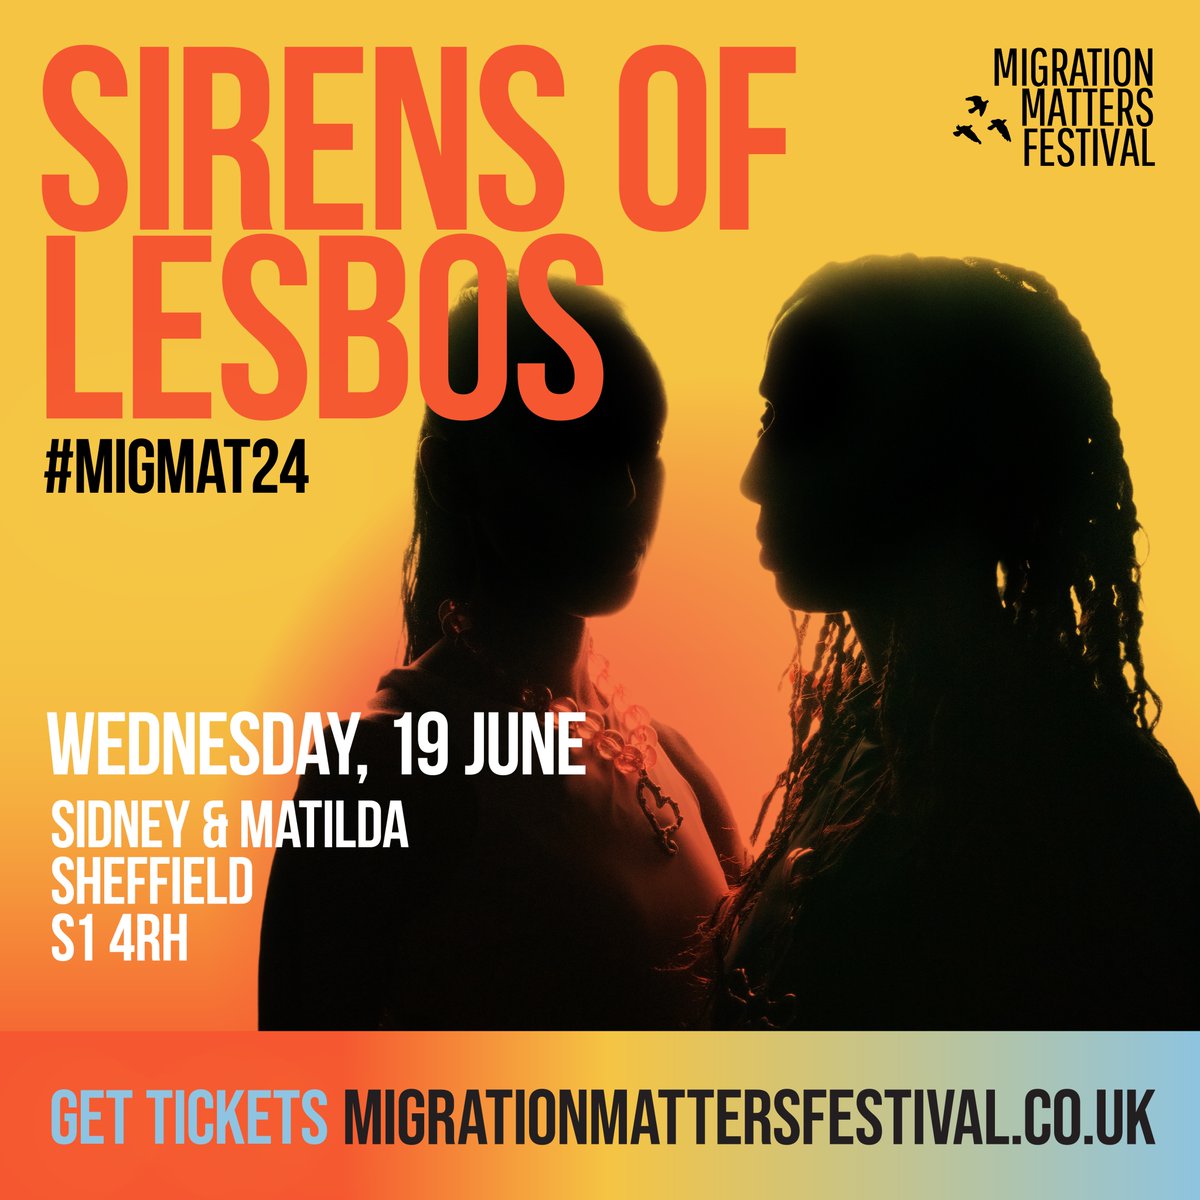 A sound unlike any other… That’s what to expect from a night of global music with our second headliner, @sirens_of_lesbos This Swiss collective spans all borders, genres & eras to create unique audio. Be part of this musical exploration in #Sheffield, via the link in bio.